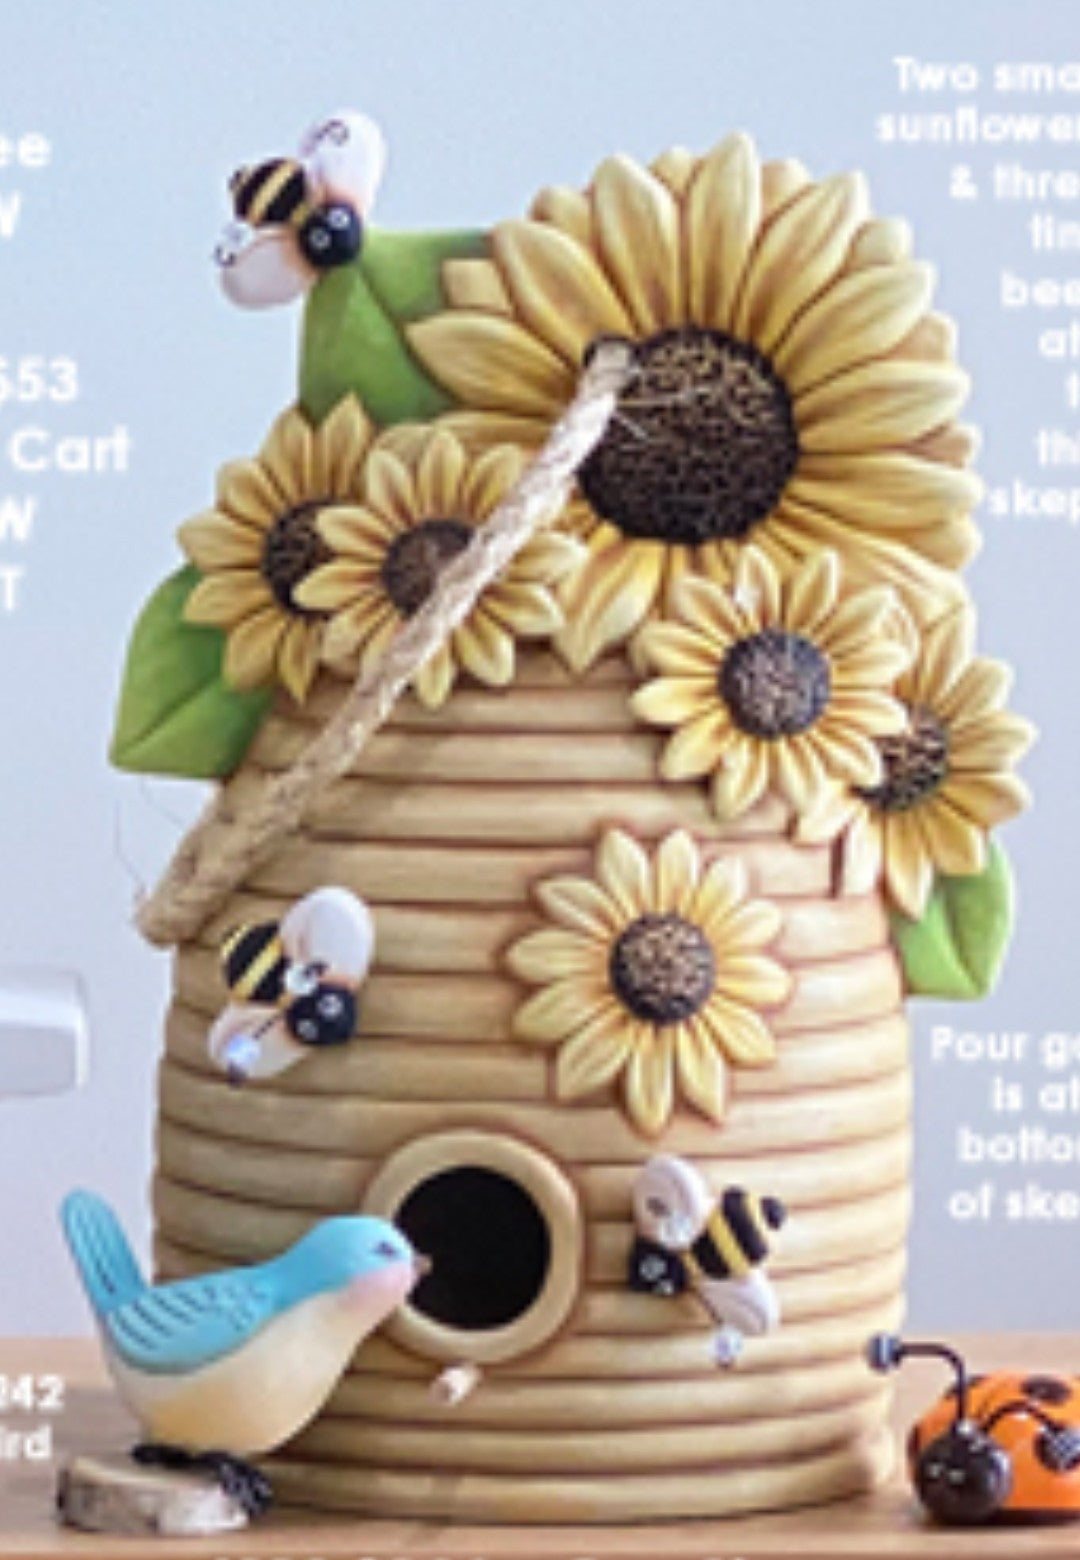 Skep with Sunflowers